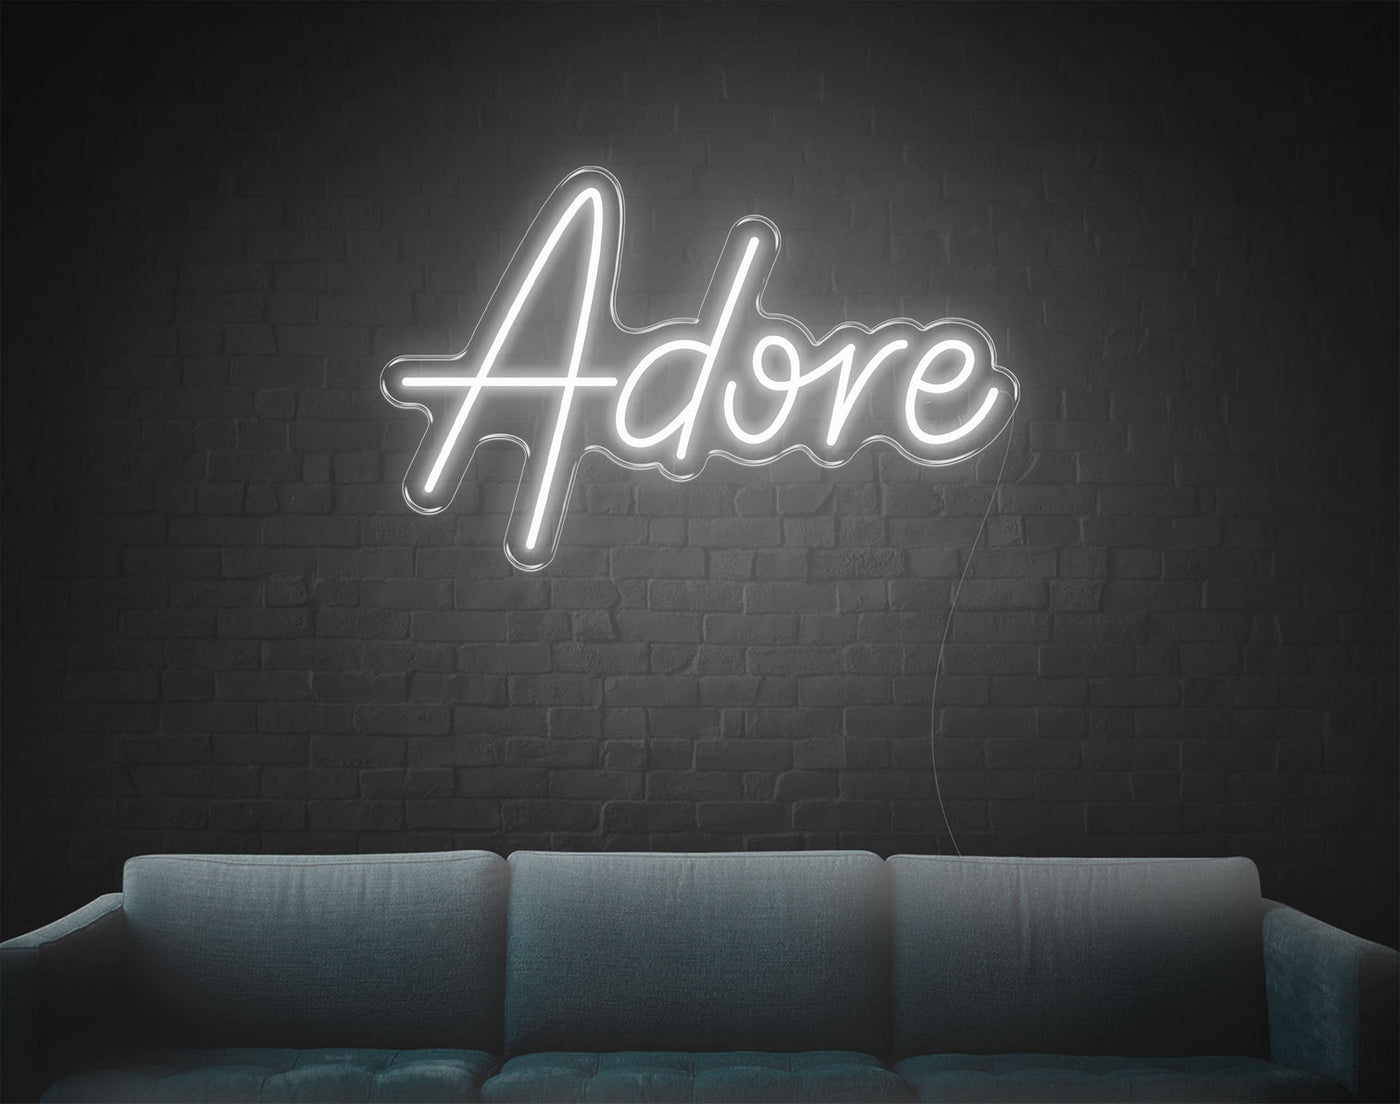 Adore LED Neon Sign - 15inch x 24inchWhite -LED Neon Signs-Item-217-21